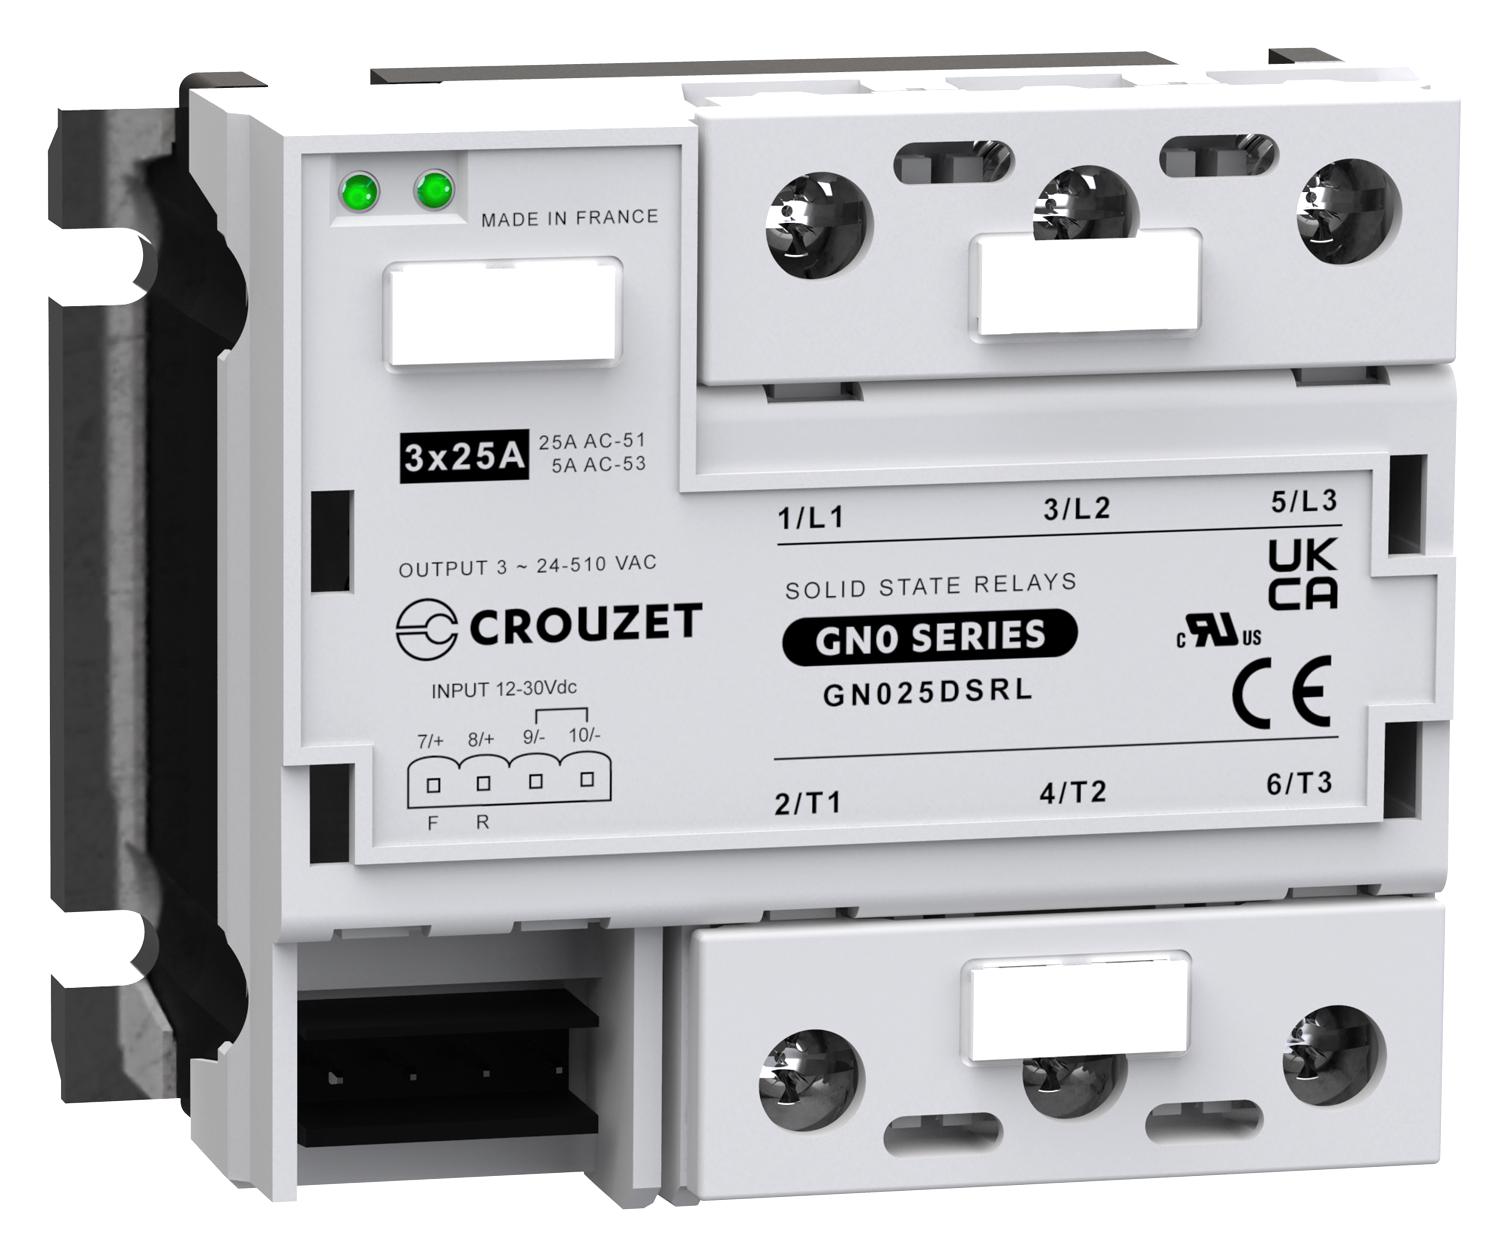 Crouzet Gn025Dsrl Solid State Relay, 25A, 12-30Vdc, Panel